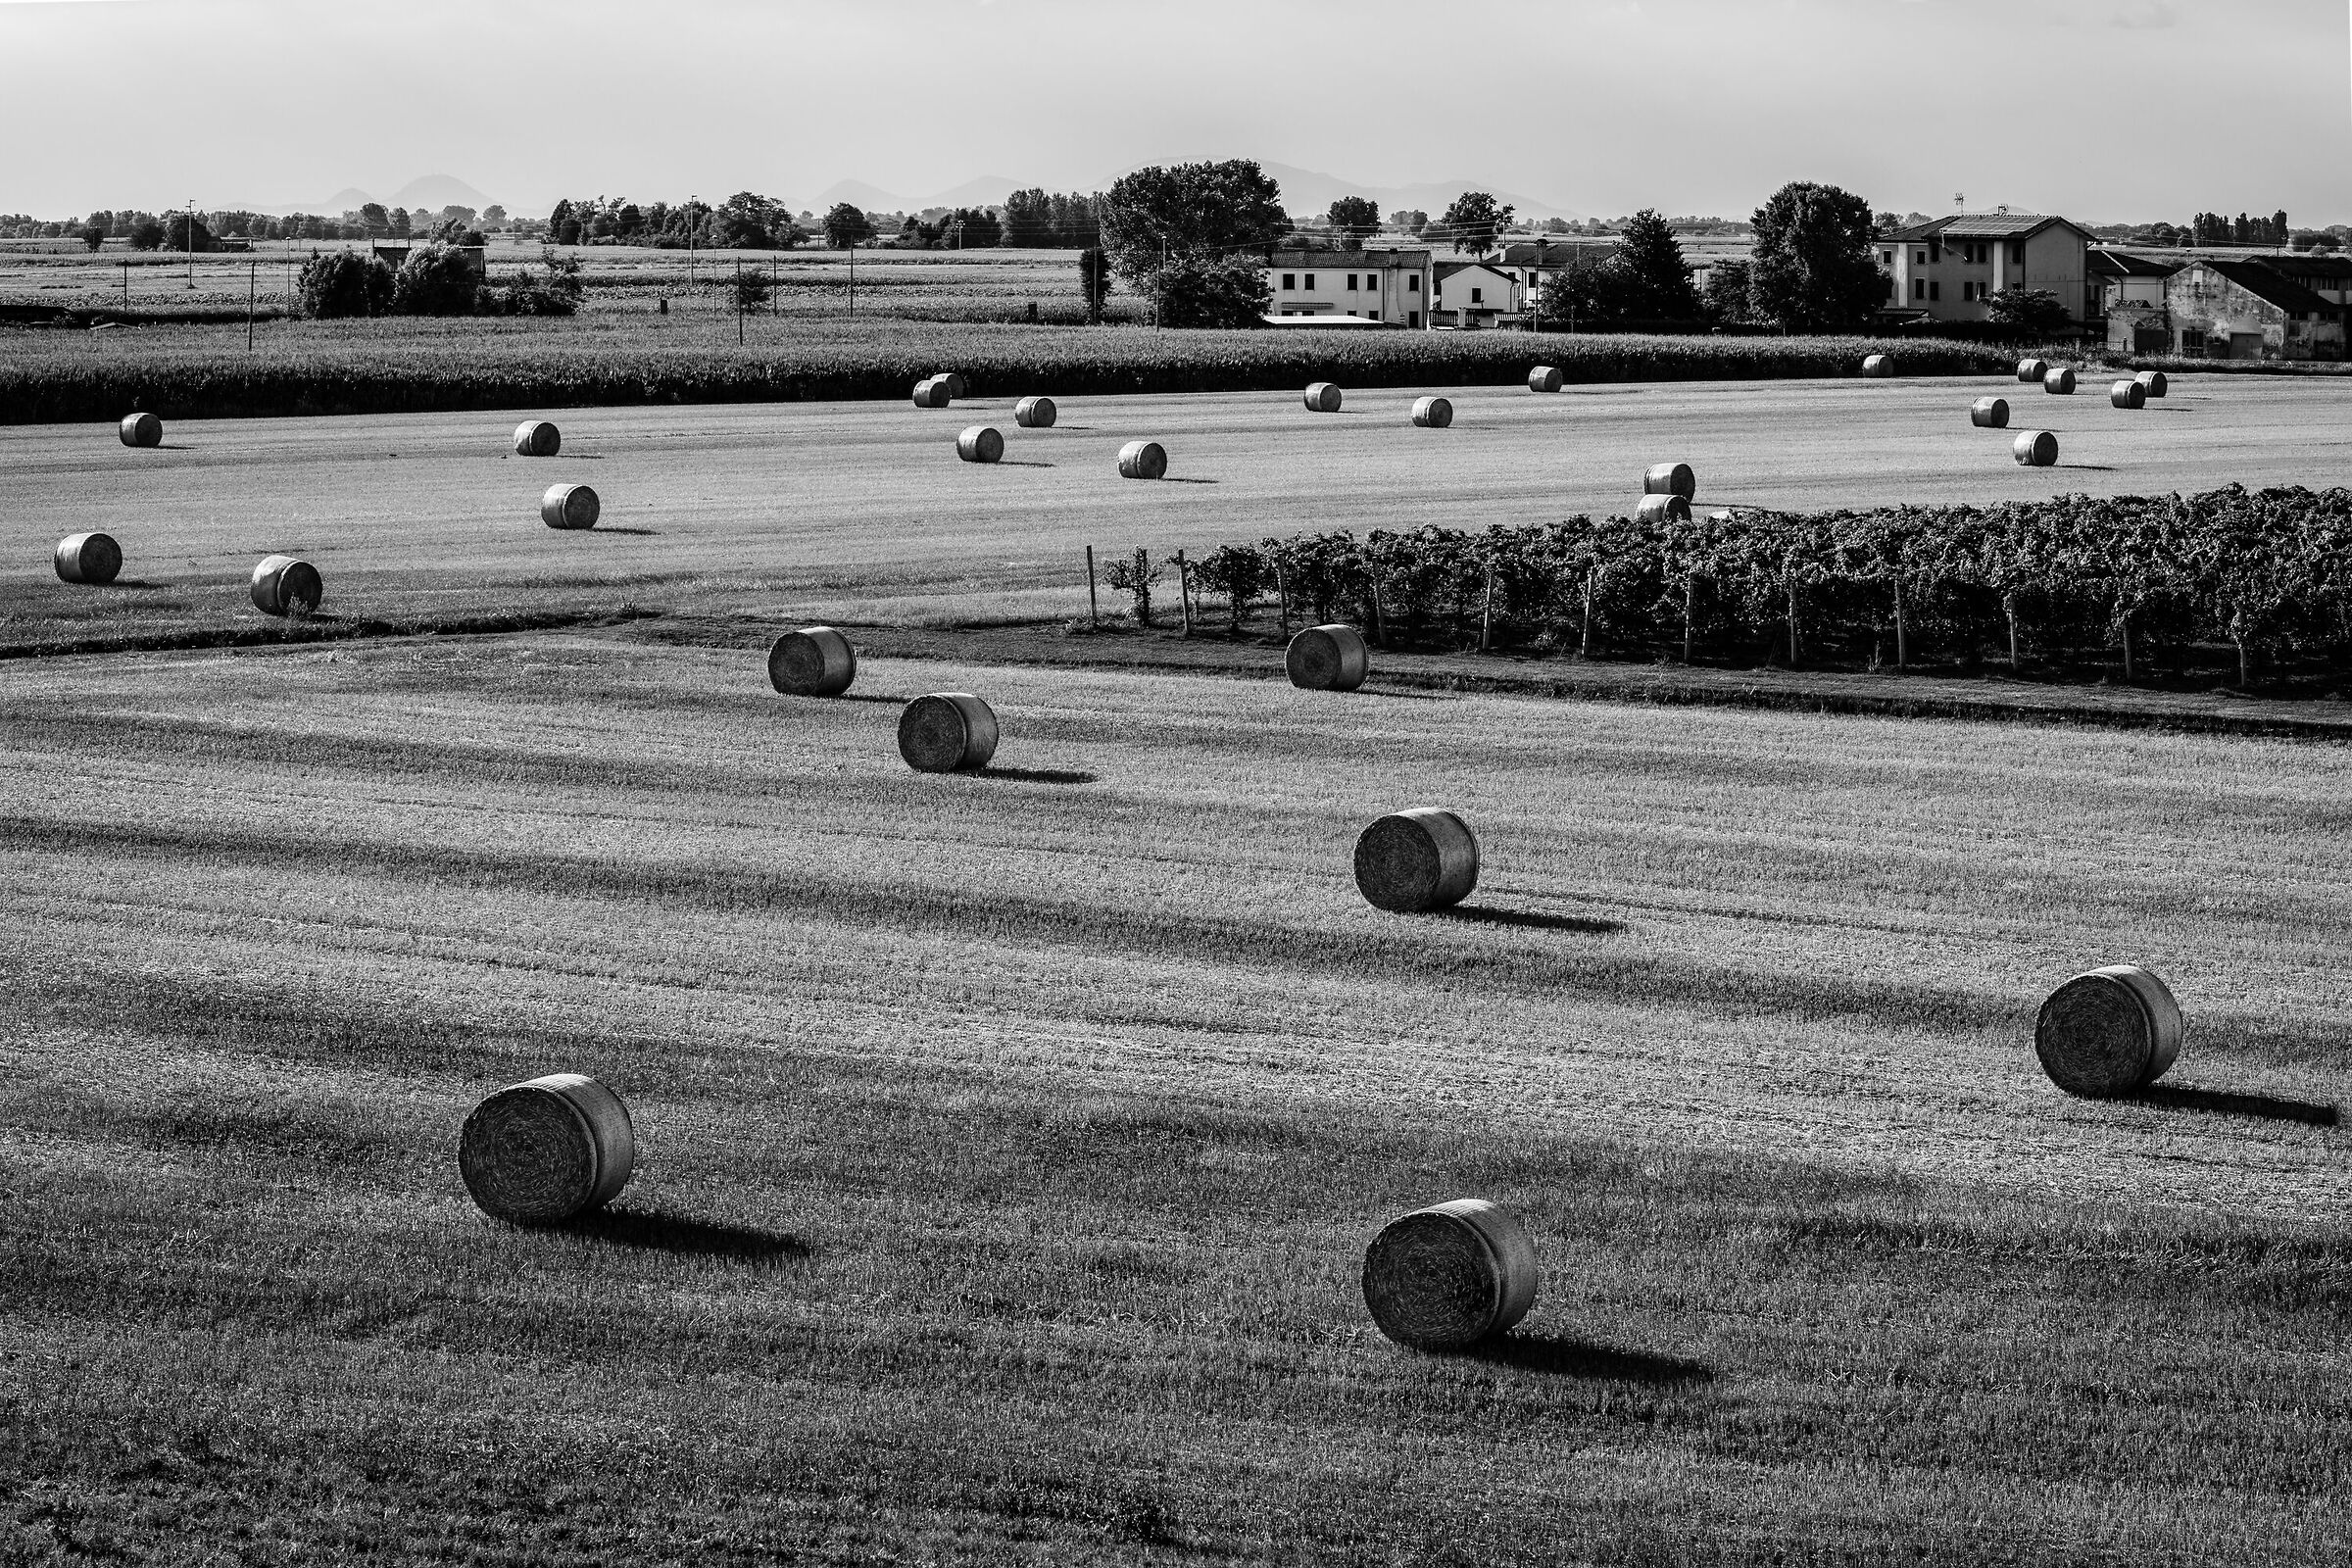 The bales and the vineyard...